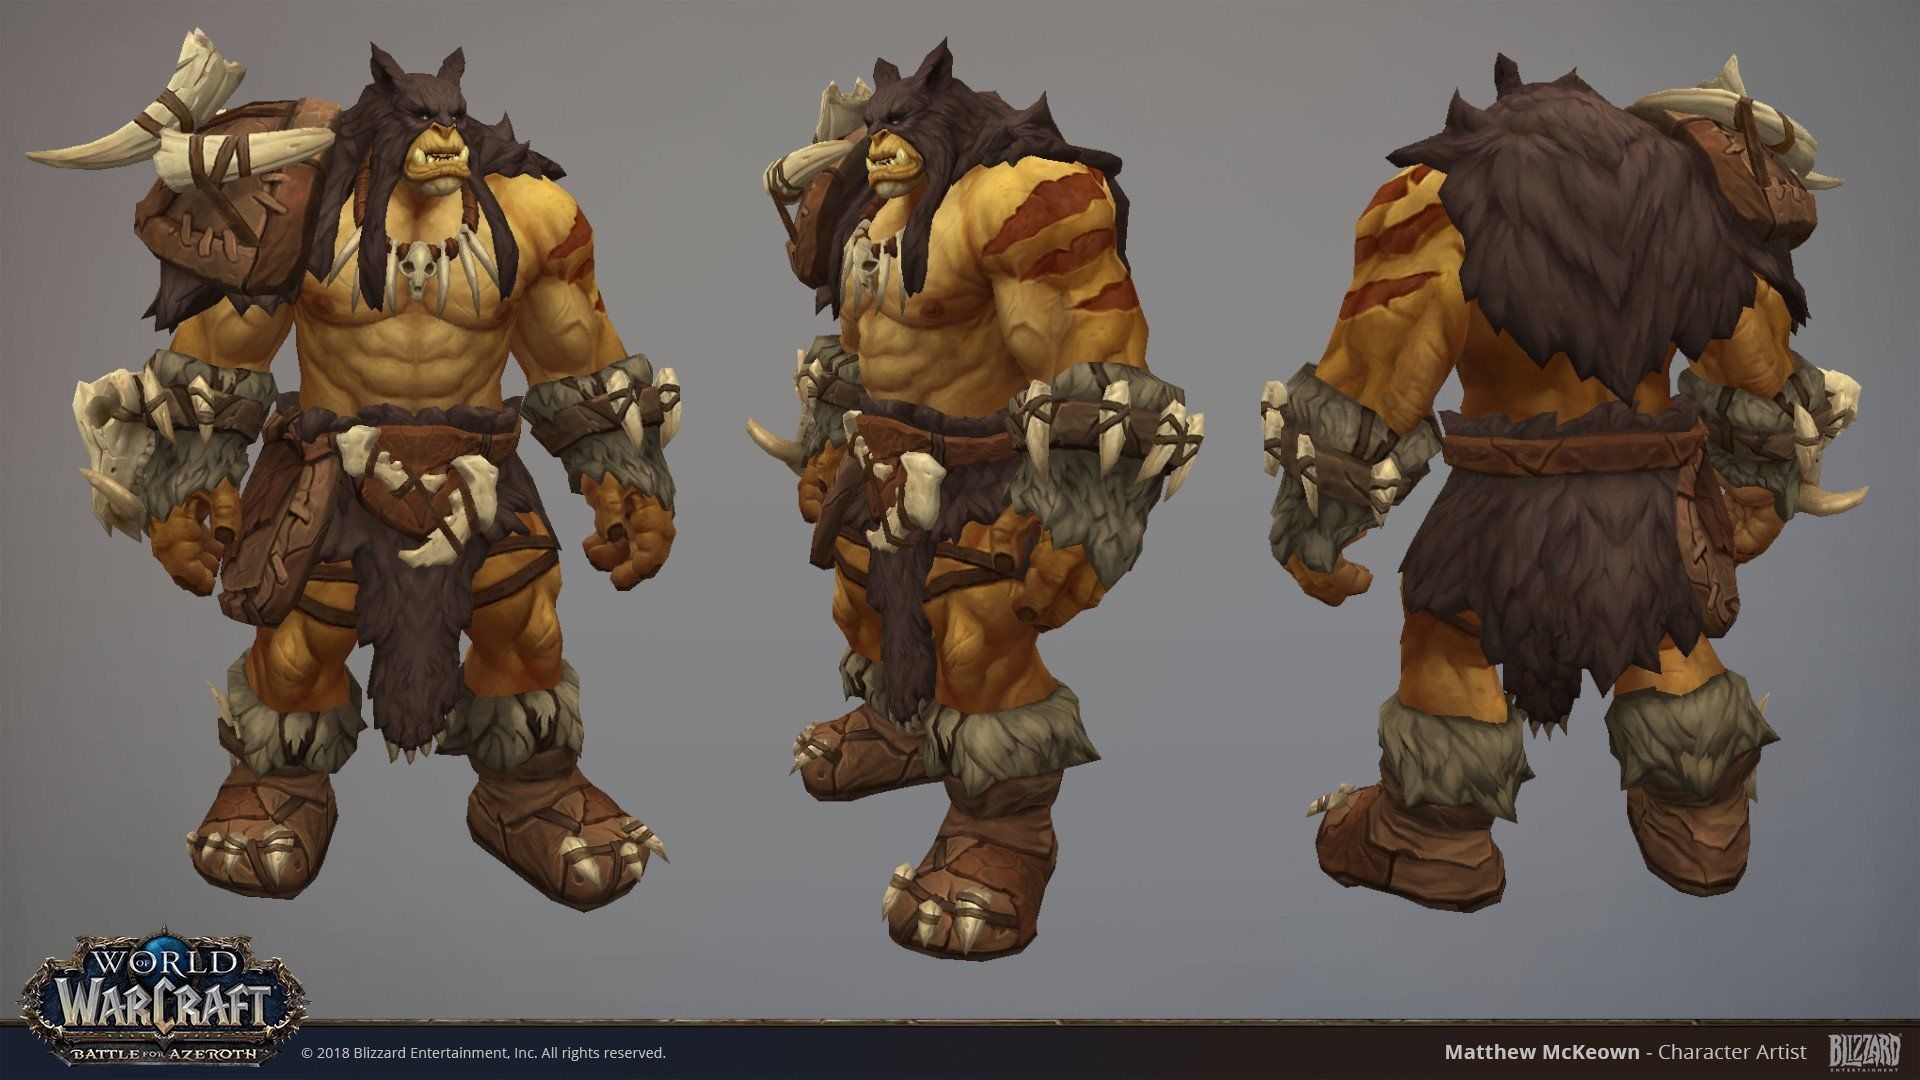 Skoll Shorties always remember the day that Rexxar got his new model and my DMs were filled to the brim in regards to the update of his model. It